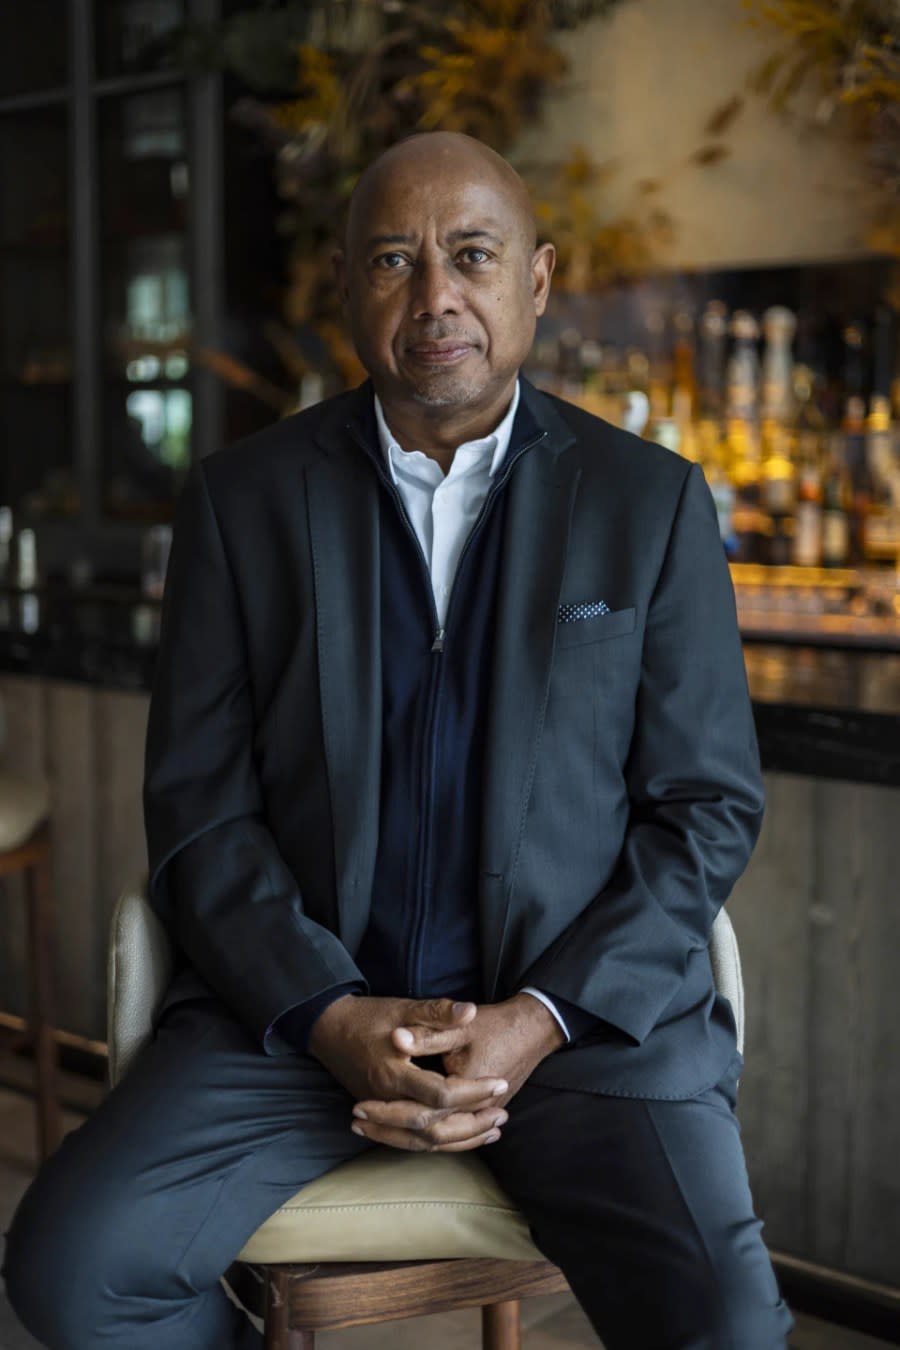 Director Raoul Peck poses for a portrait to promote his documentary film “Silver Dollar Road” during the Toronto International Film Festival on Sept. 9, 2023, in Toronto. (Photo by Joel C Ryan/Invision/AP, File)